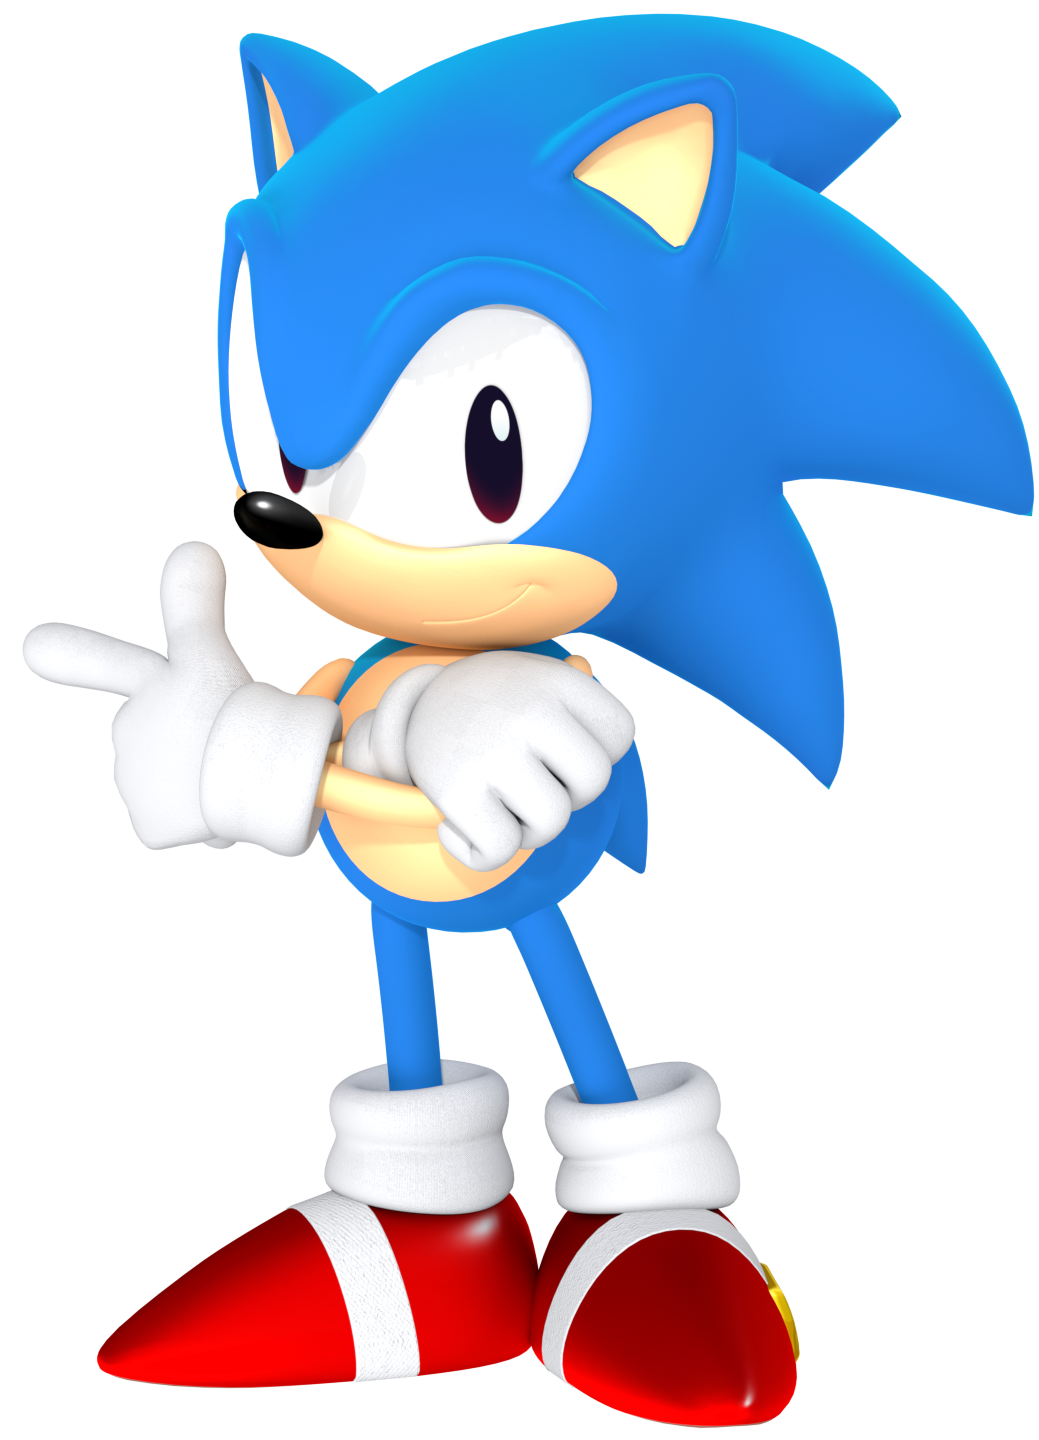 Sonic The Hedgehog Idle Pose 9X9 3D Pixel Frame – Many Cool Things